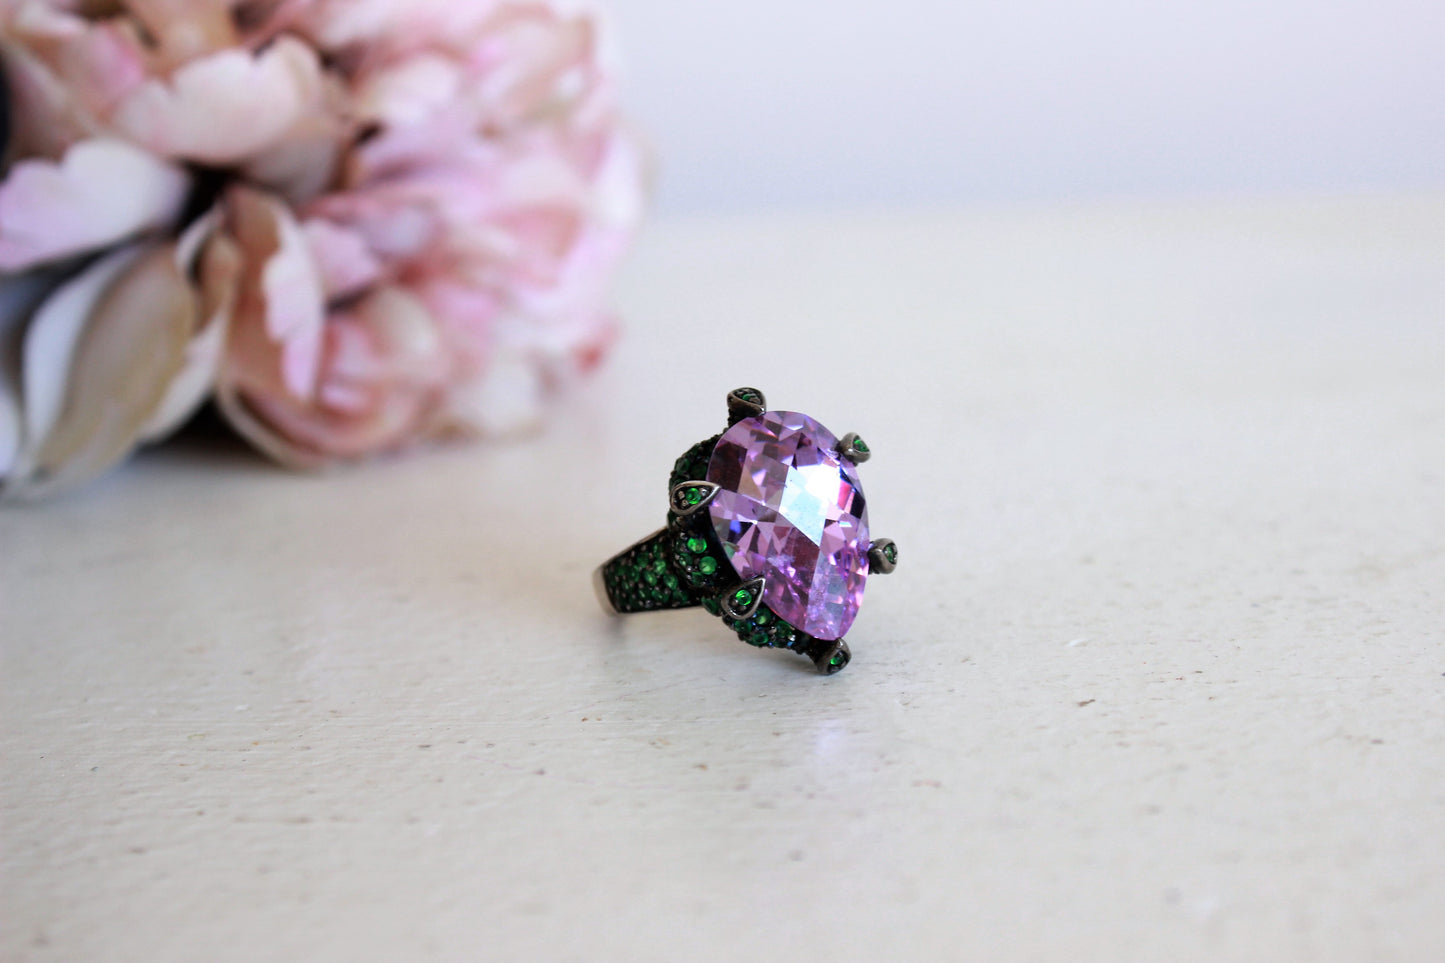 Vintage Statement Ring in Sterlling Silver and Amethyst